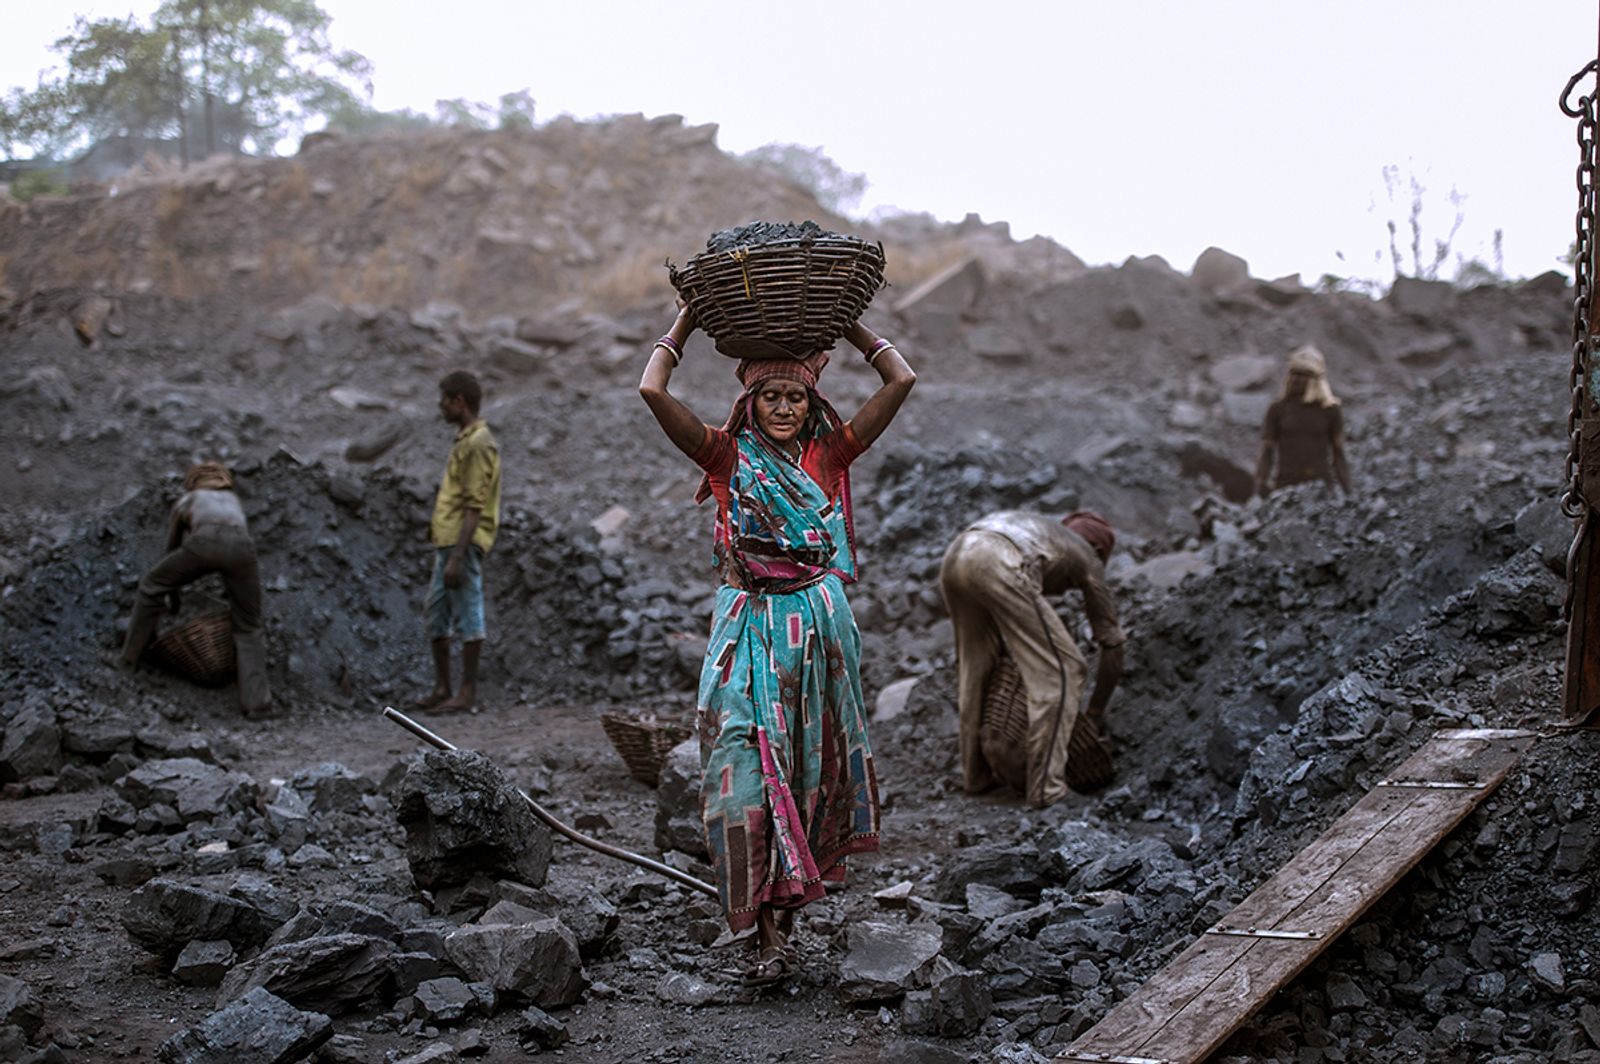 © Valerie Leonard - NO RETIREMENTAt around 8 am, some of them are paid 1$ a day to load manually the coal in the trucks.